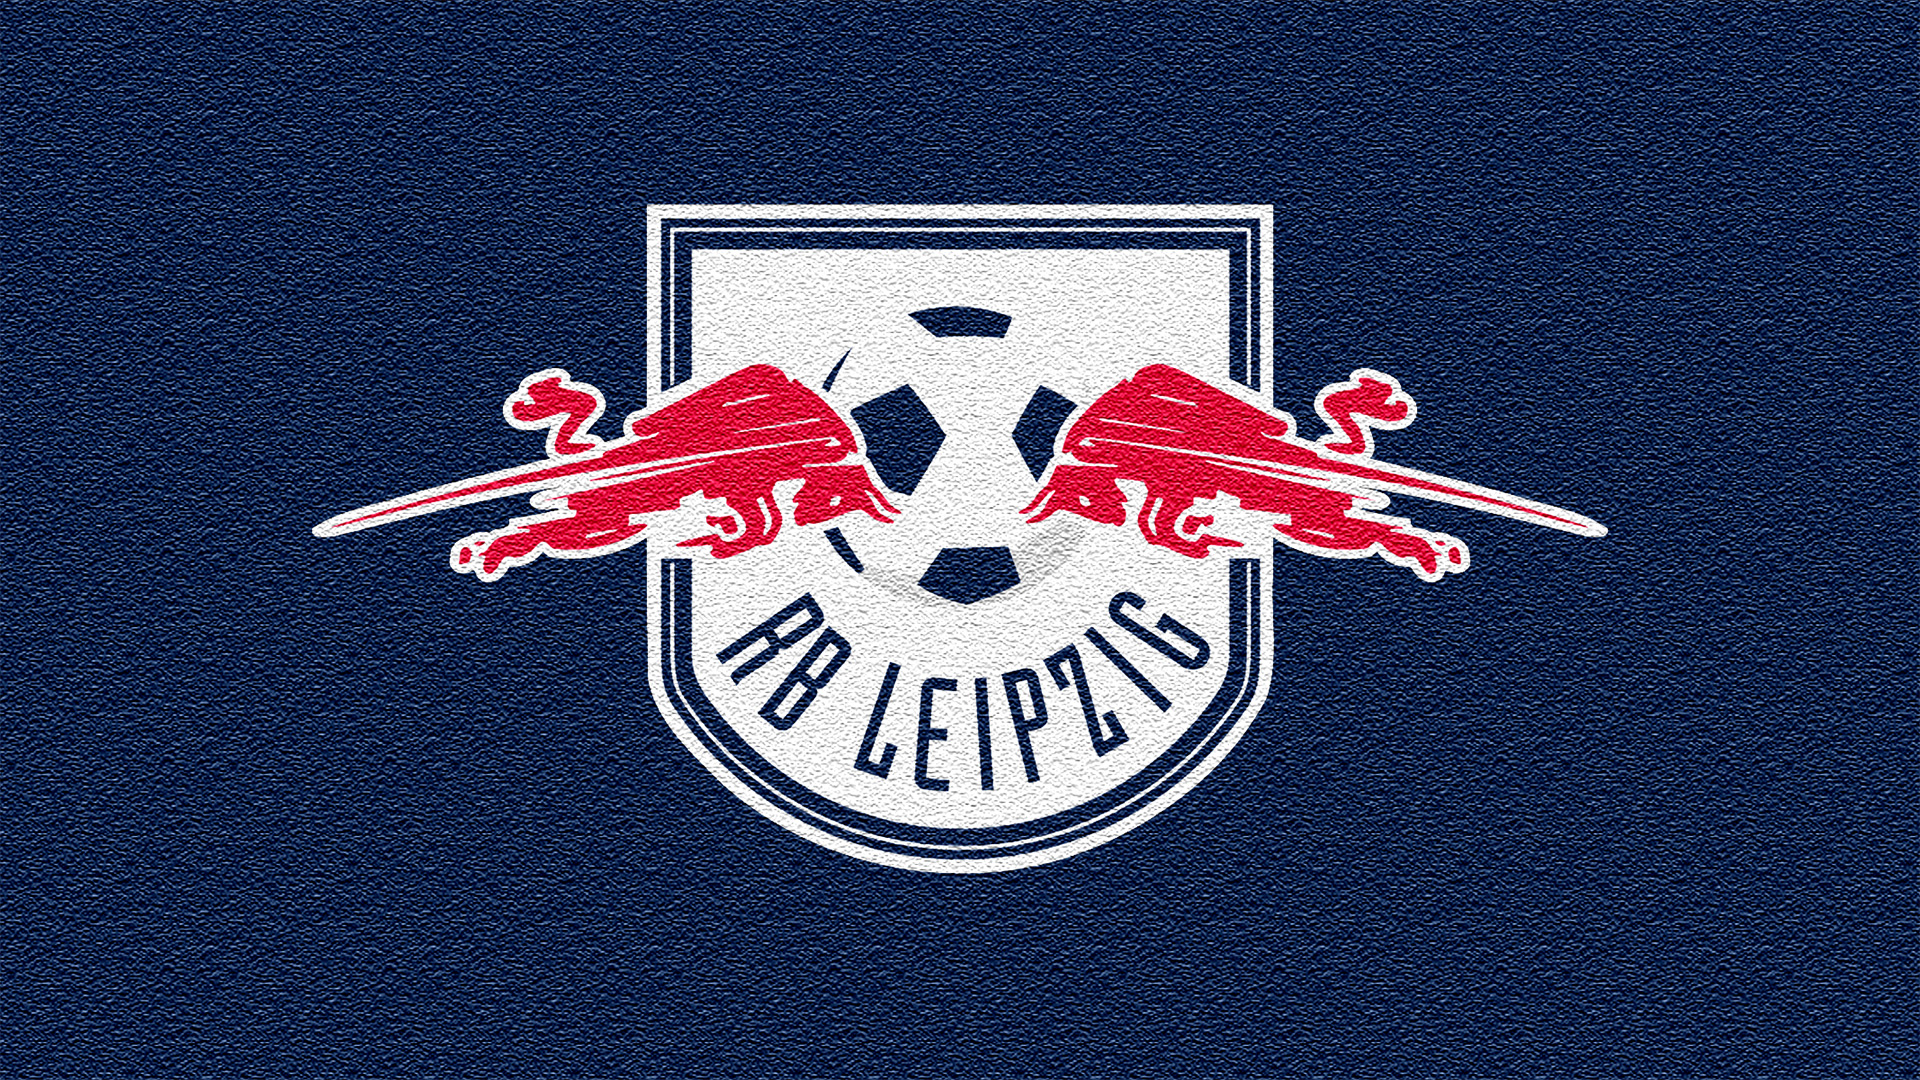 Sports RB Leipzig HD Wallpaper | Background Image